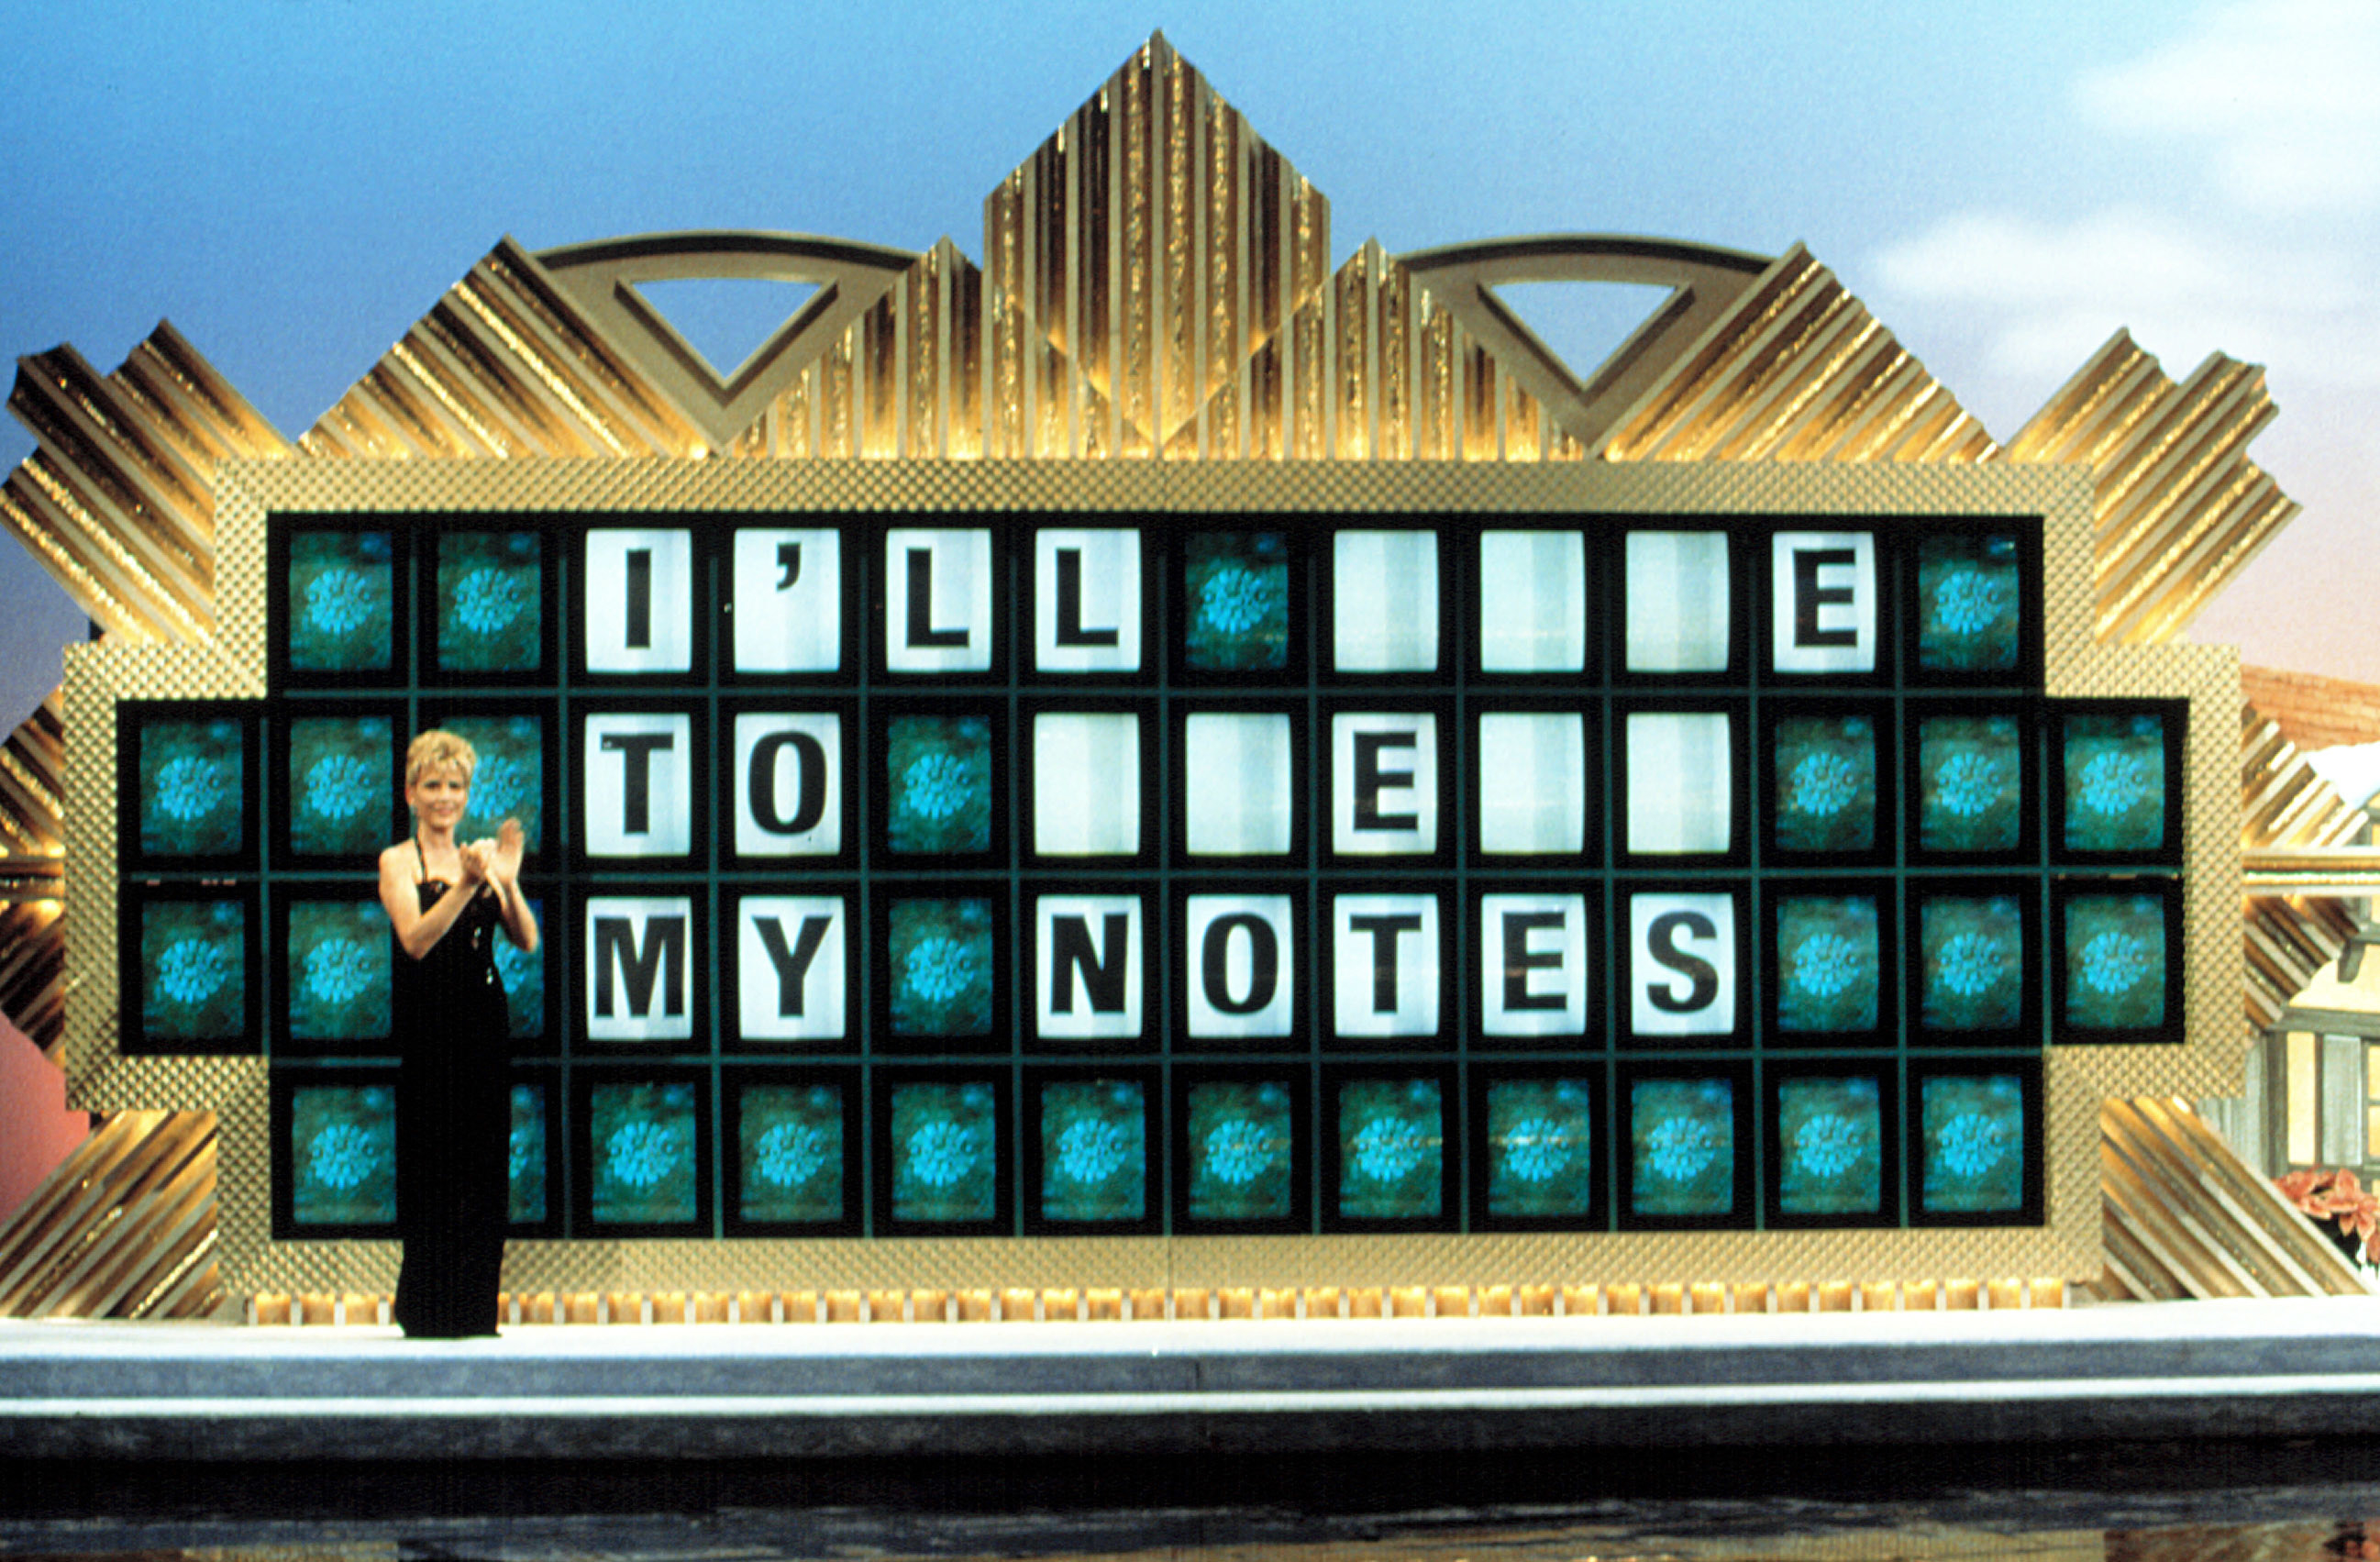 Vanna White stands in front of a puzzle